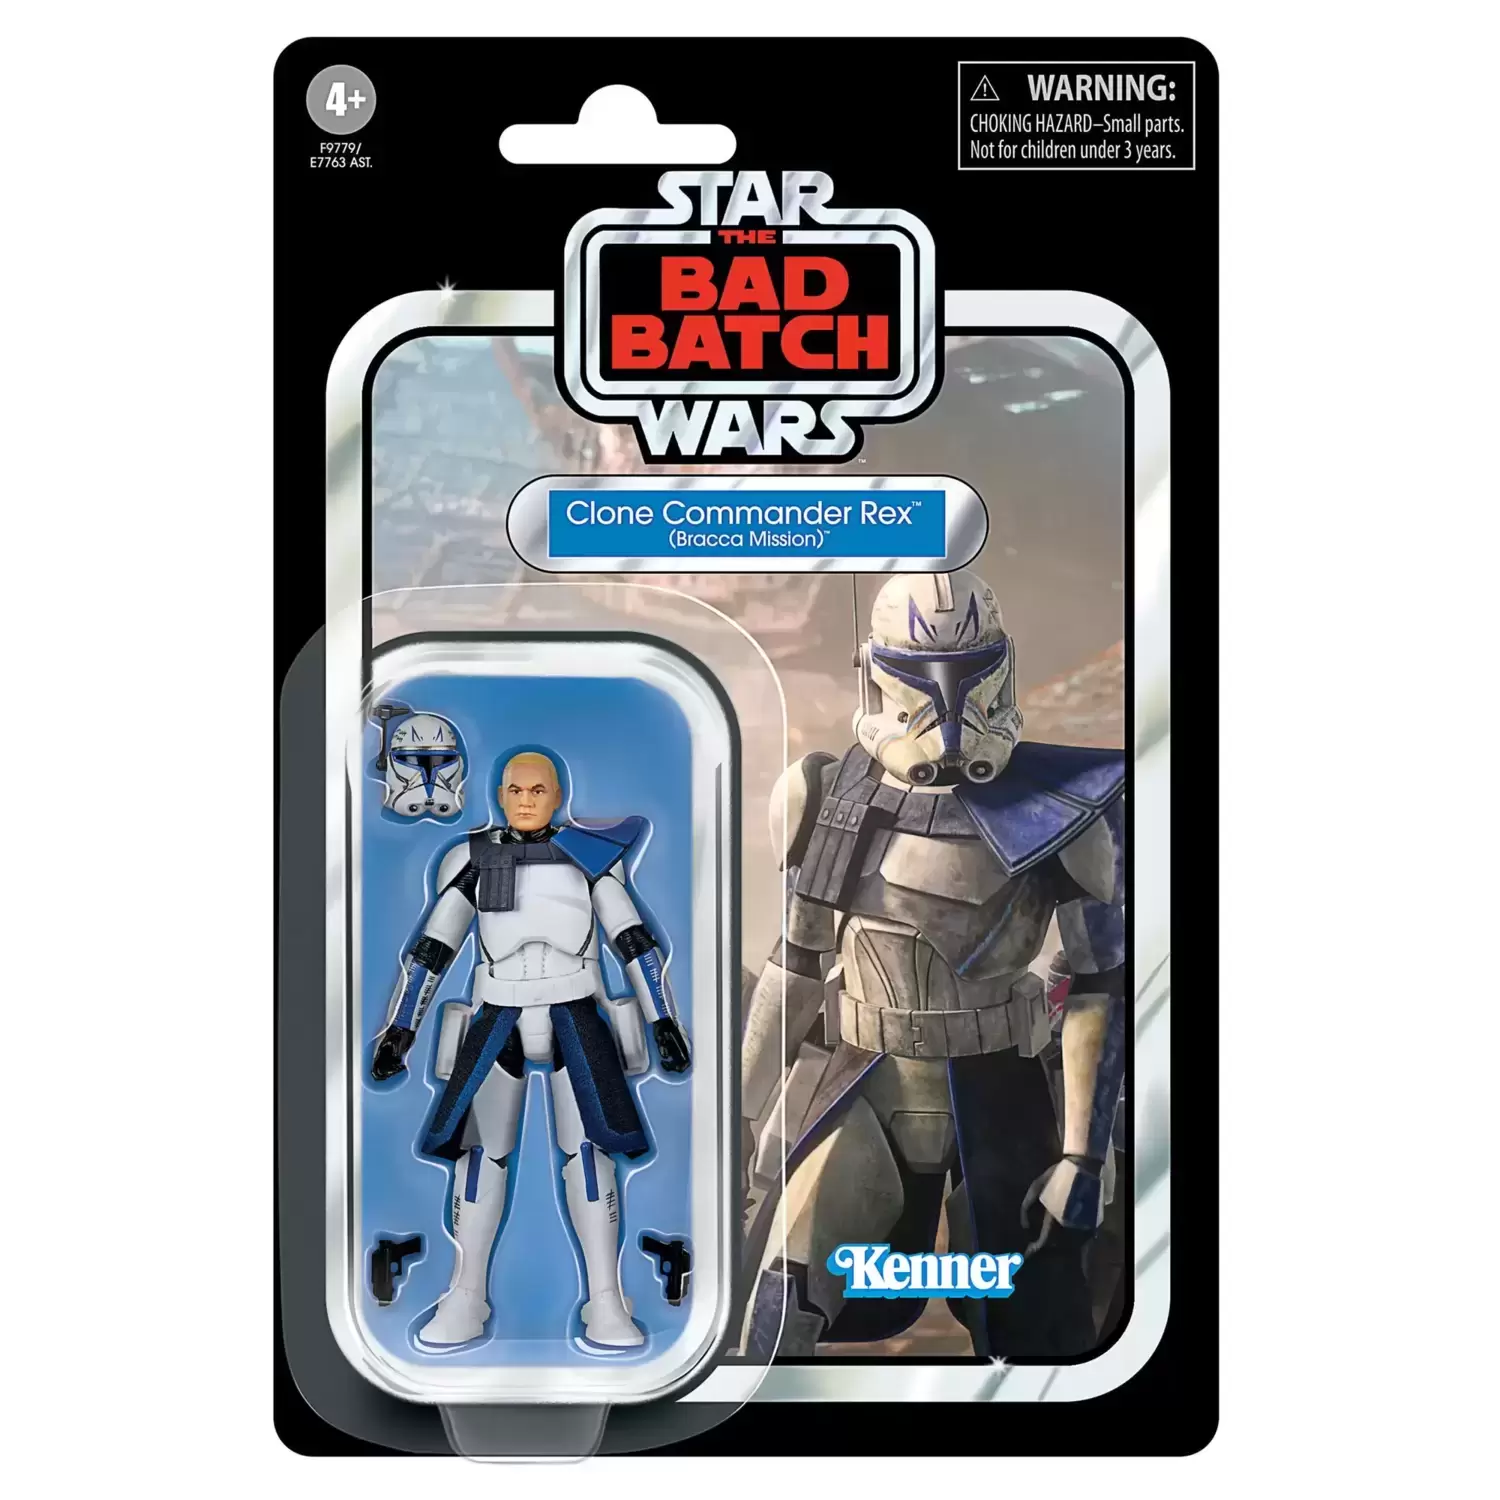 The Vintage Collection - Star Wars The Vintage Collection Clone Commander Rex (Bracca Mission)  F9779